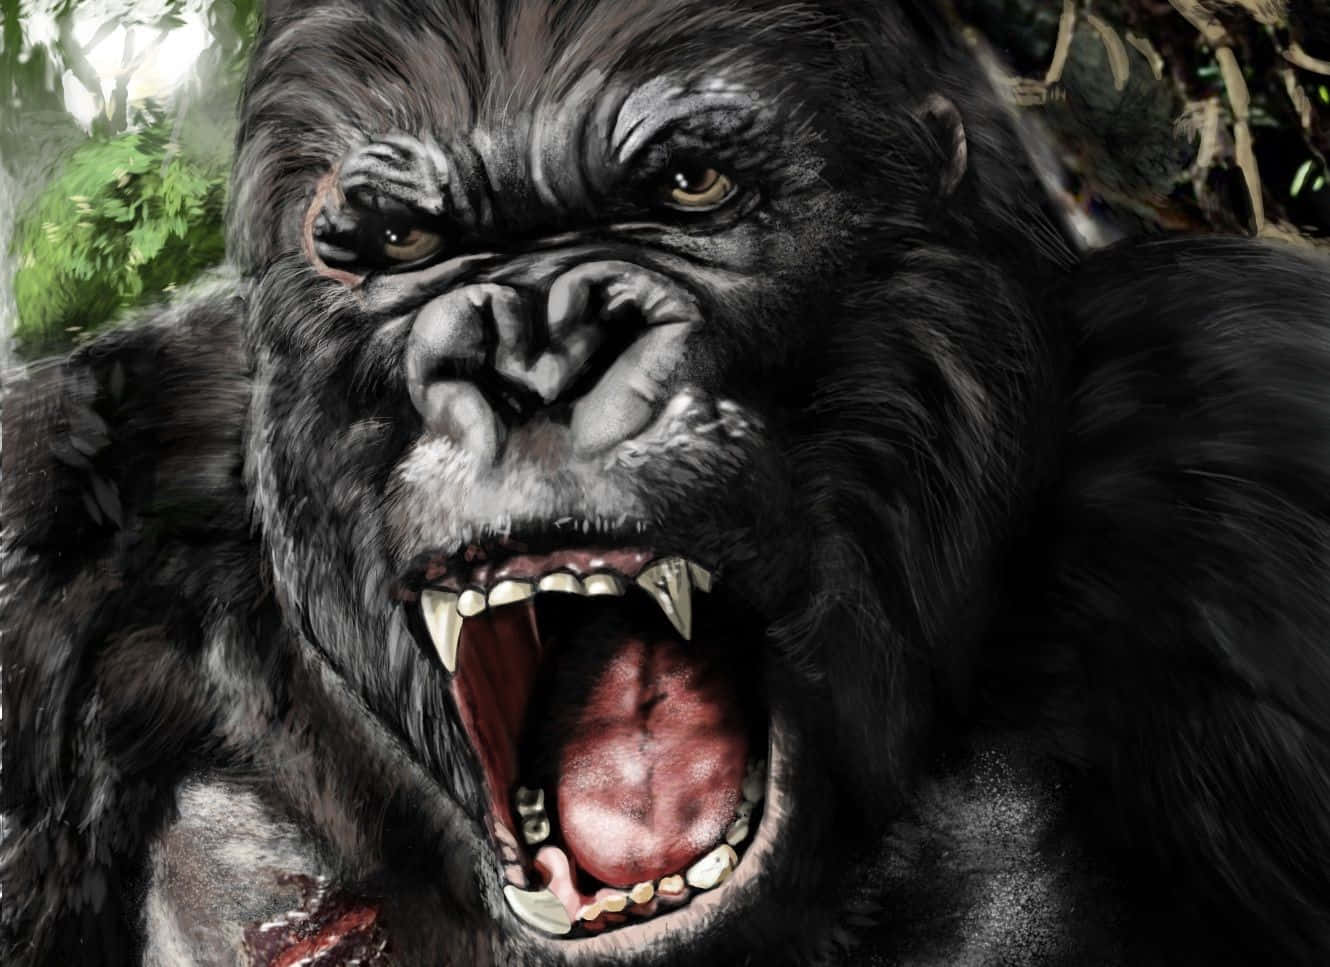 A Gorilla Is Shown With Its Mouth Open